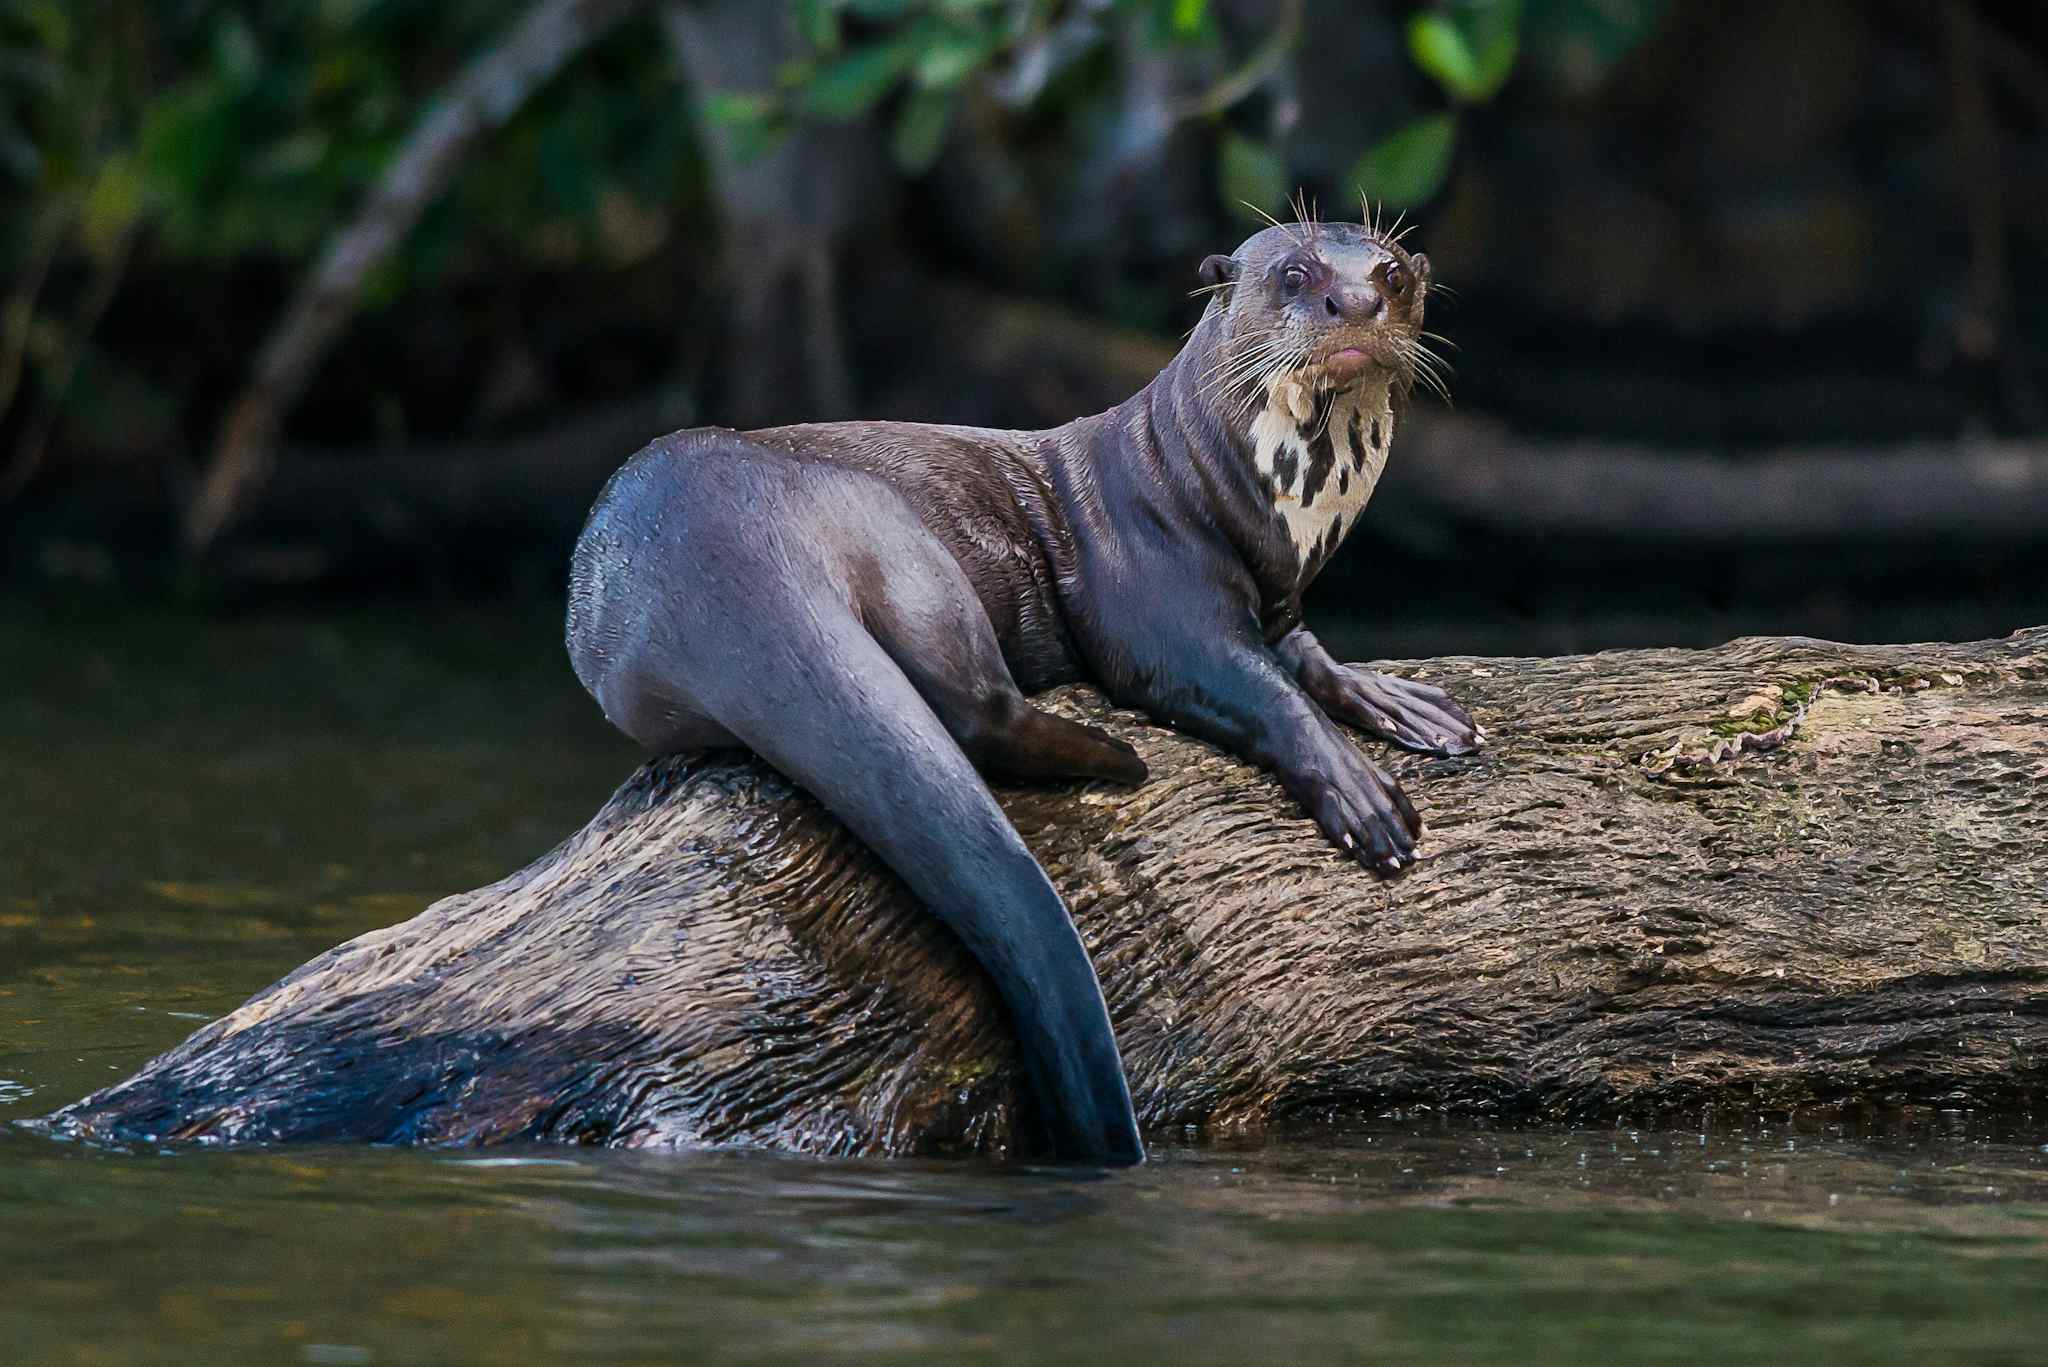 Giant River Otter standing on a log in the amazon Jungle, Peru.